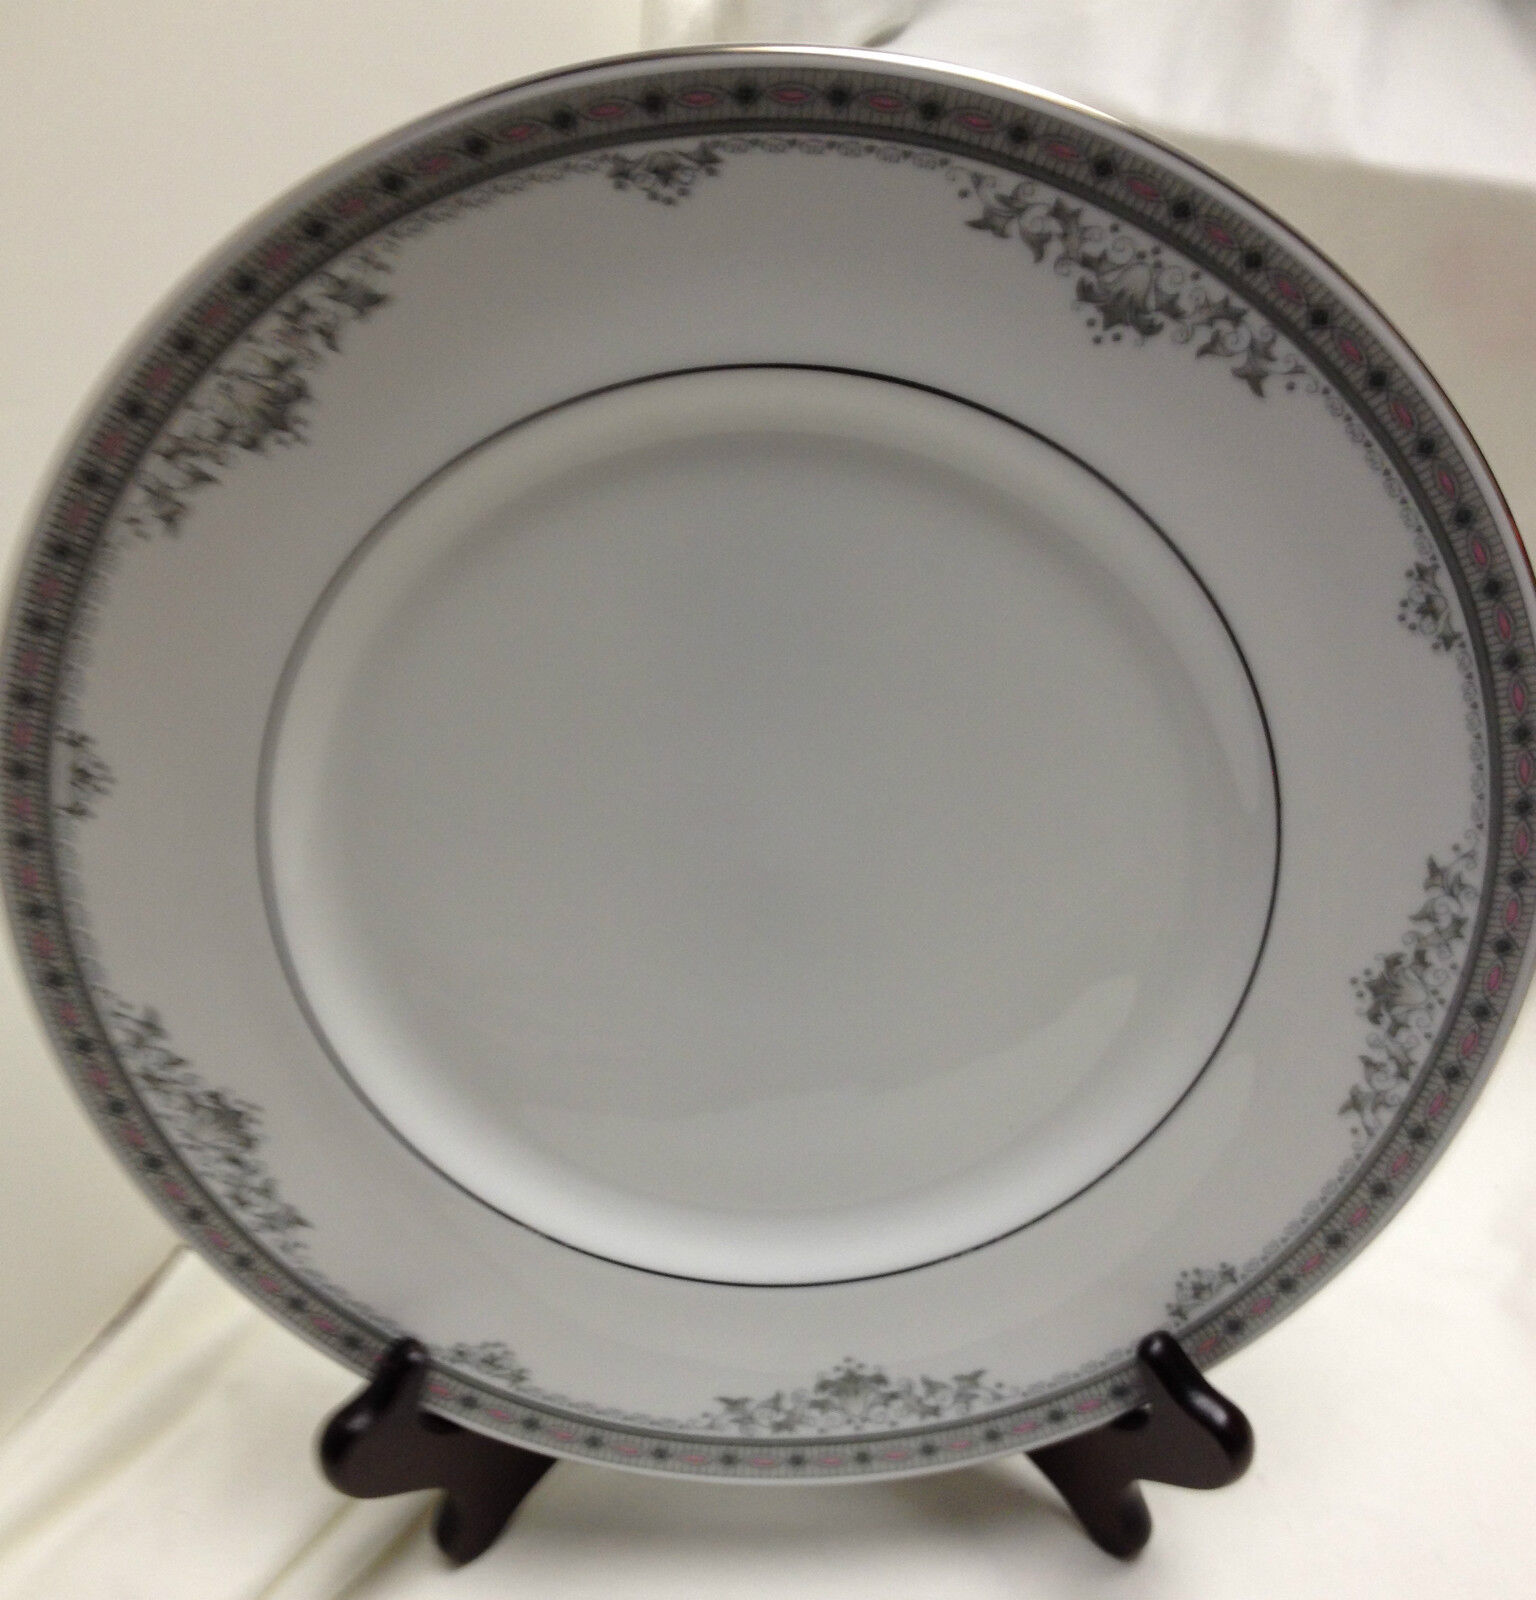 Royal Doulton YORK Dinner Plate Fine English Bone China H5100 1985 Made in Eng